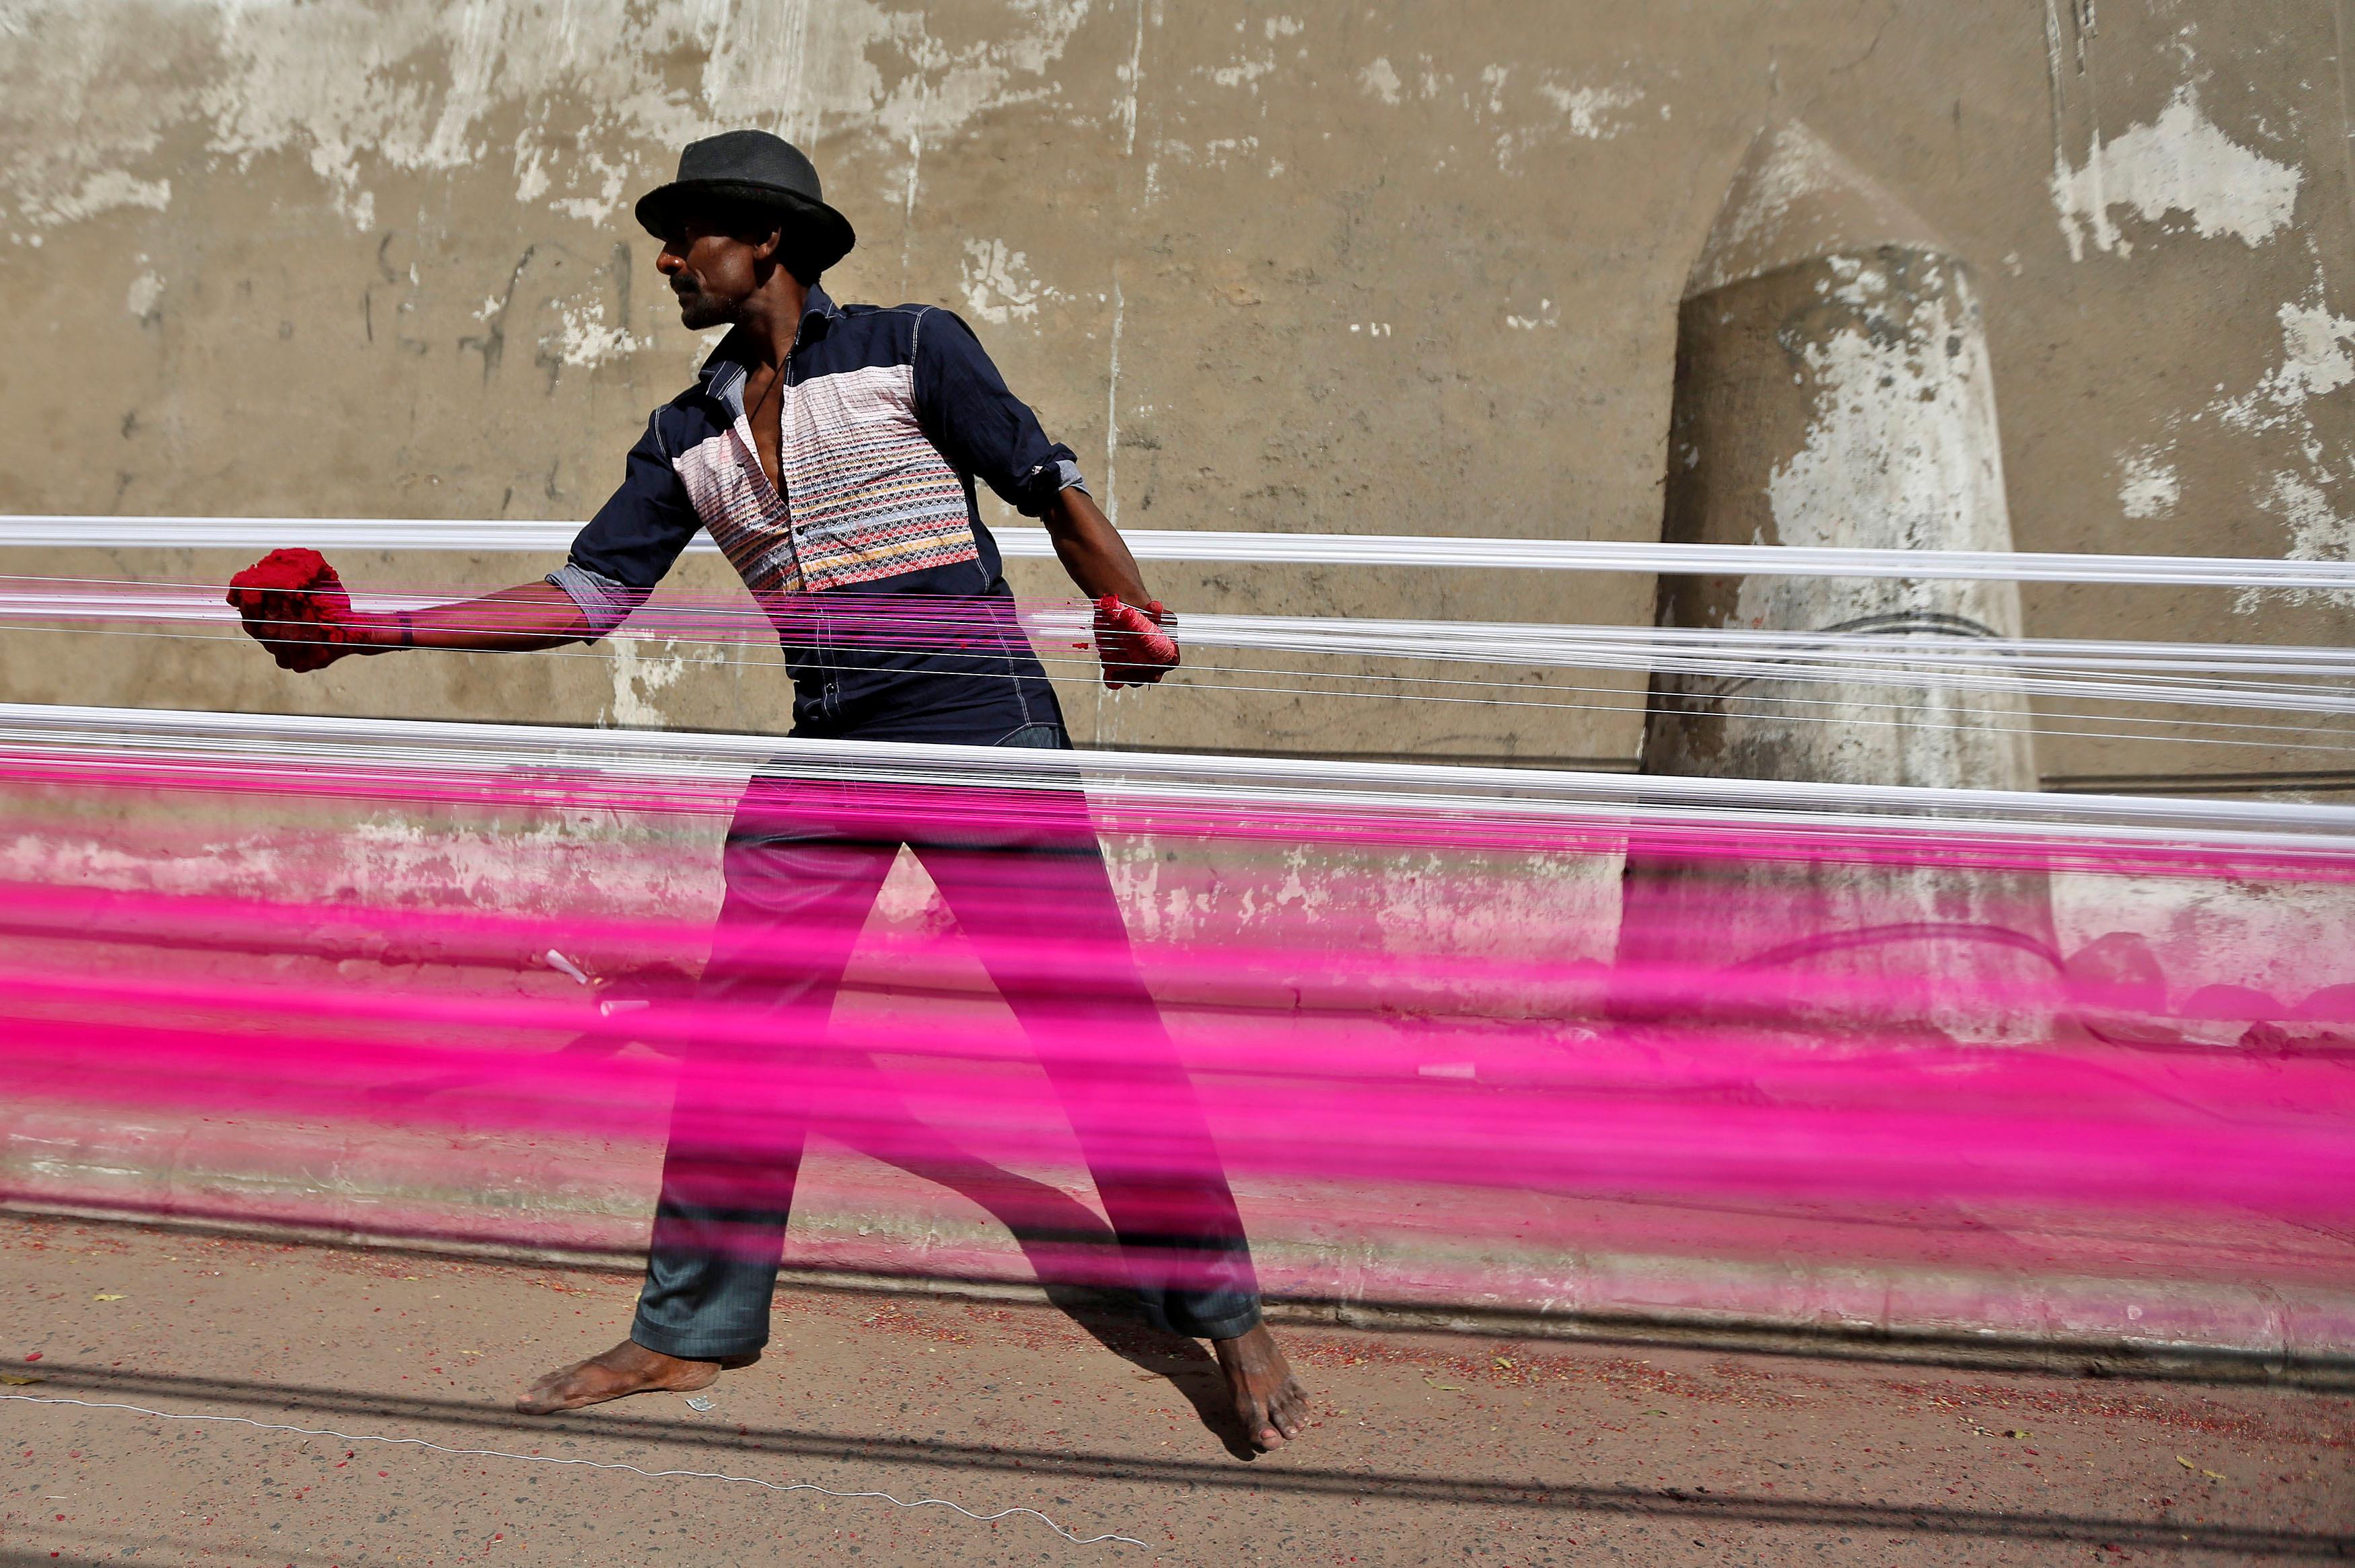 A worker applies colour to strings which will be used to fly kites, on a roadside in Ahmedabad